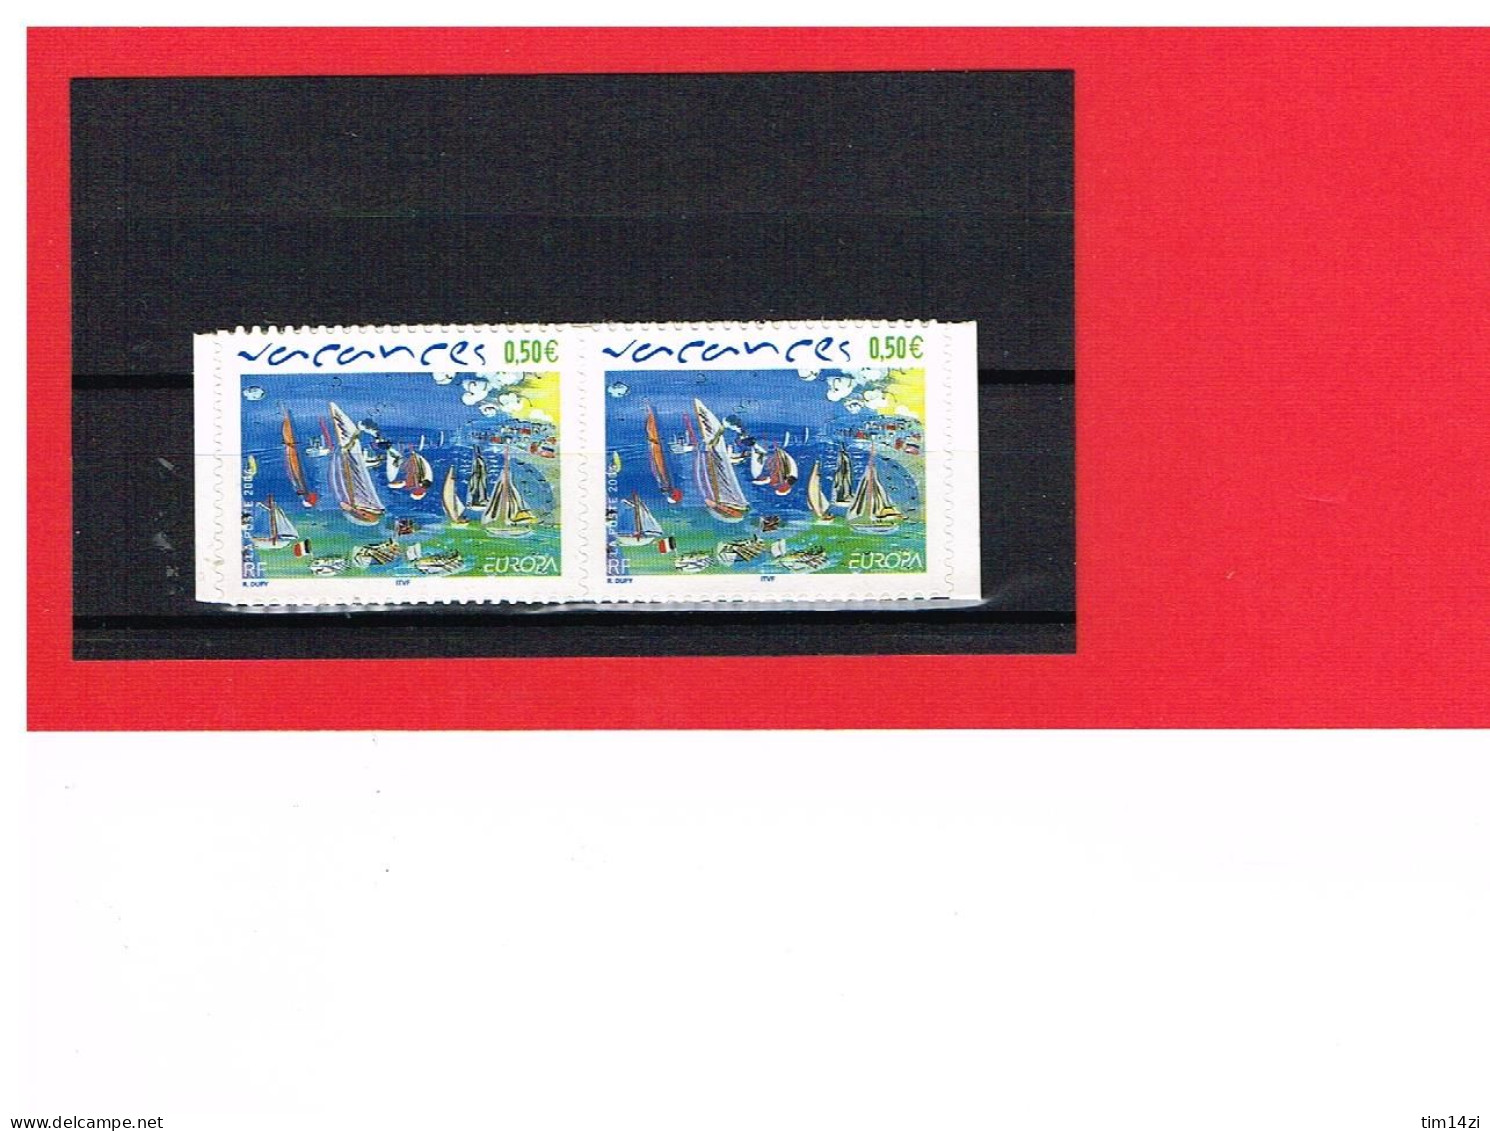 FRANCE - 2004 -  ADHESIFS** -  N°42 Ou N°3672   - 2 TIMBRES - VACANCES - Y & T - COTE 3.20 € - Unused Stamps